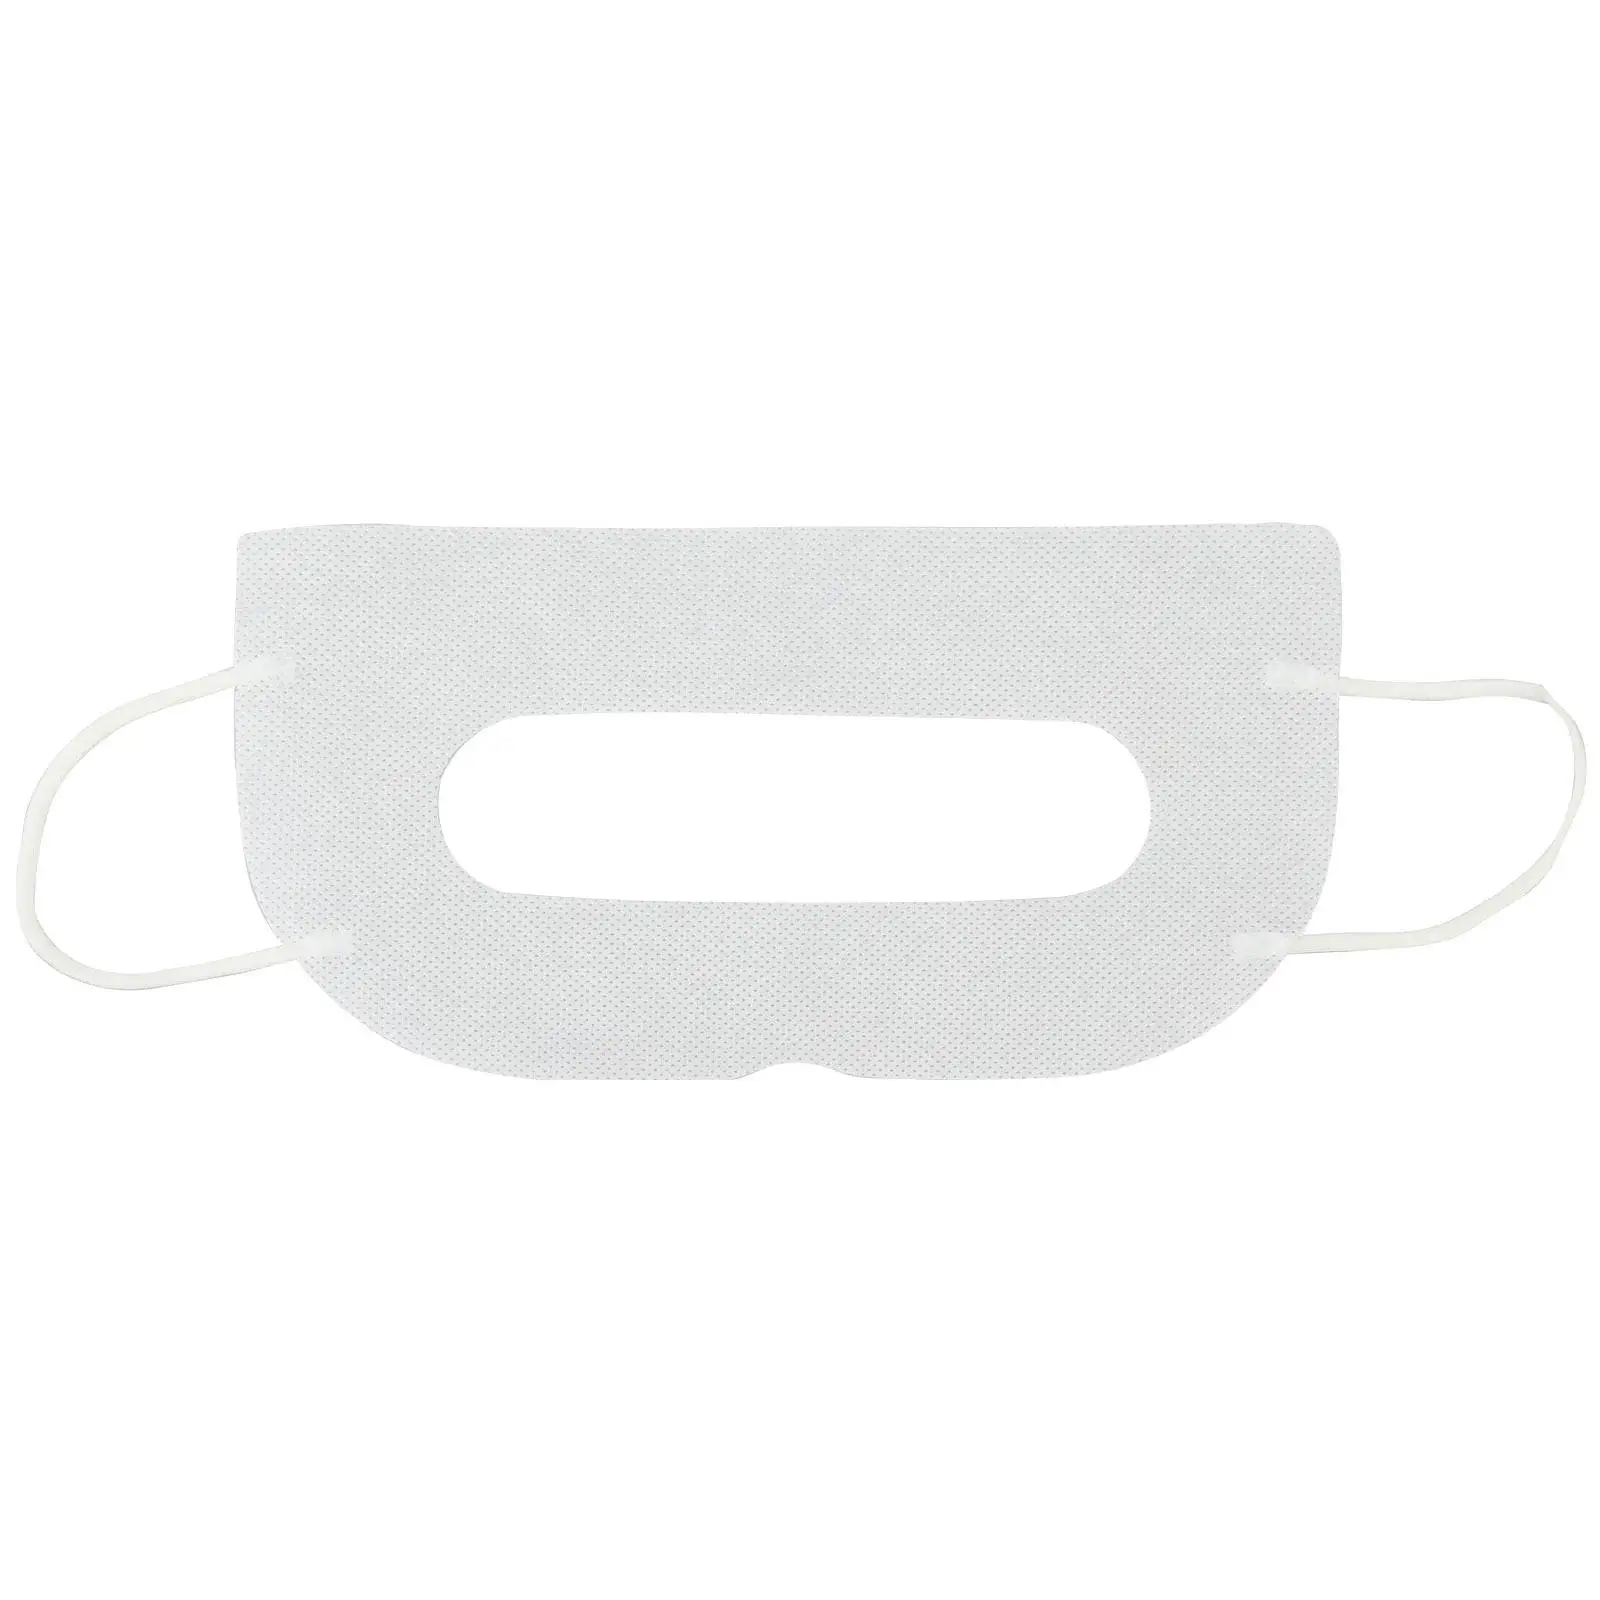 Disposable Cover For Eye Universal Vr Goggles Ear Rope Comfortable Anti-Sweat Anti-Bacteria Eye Protection Eye Mask